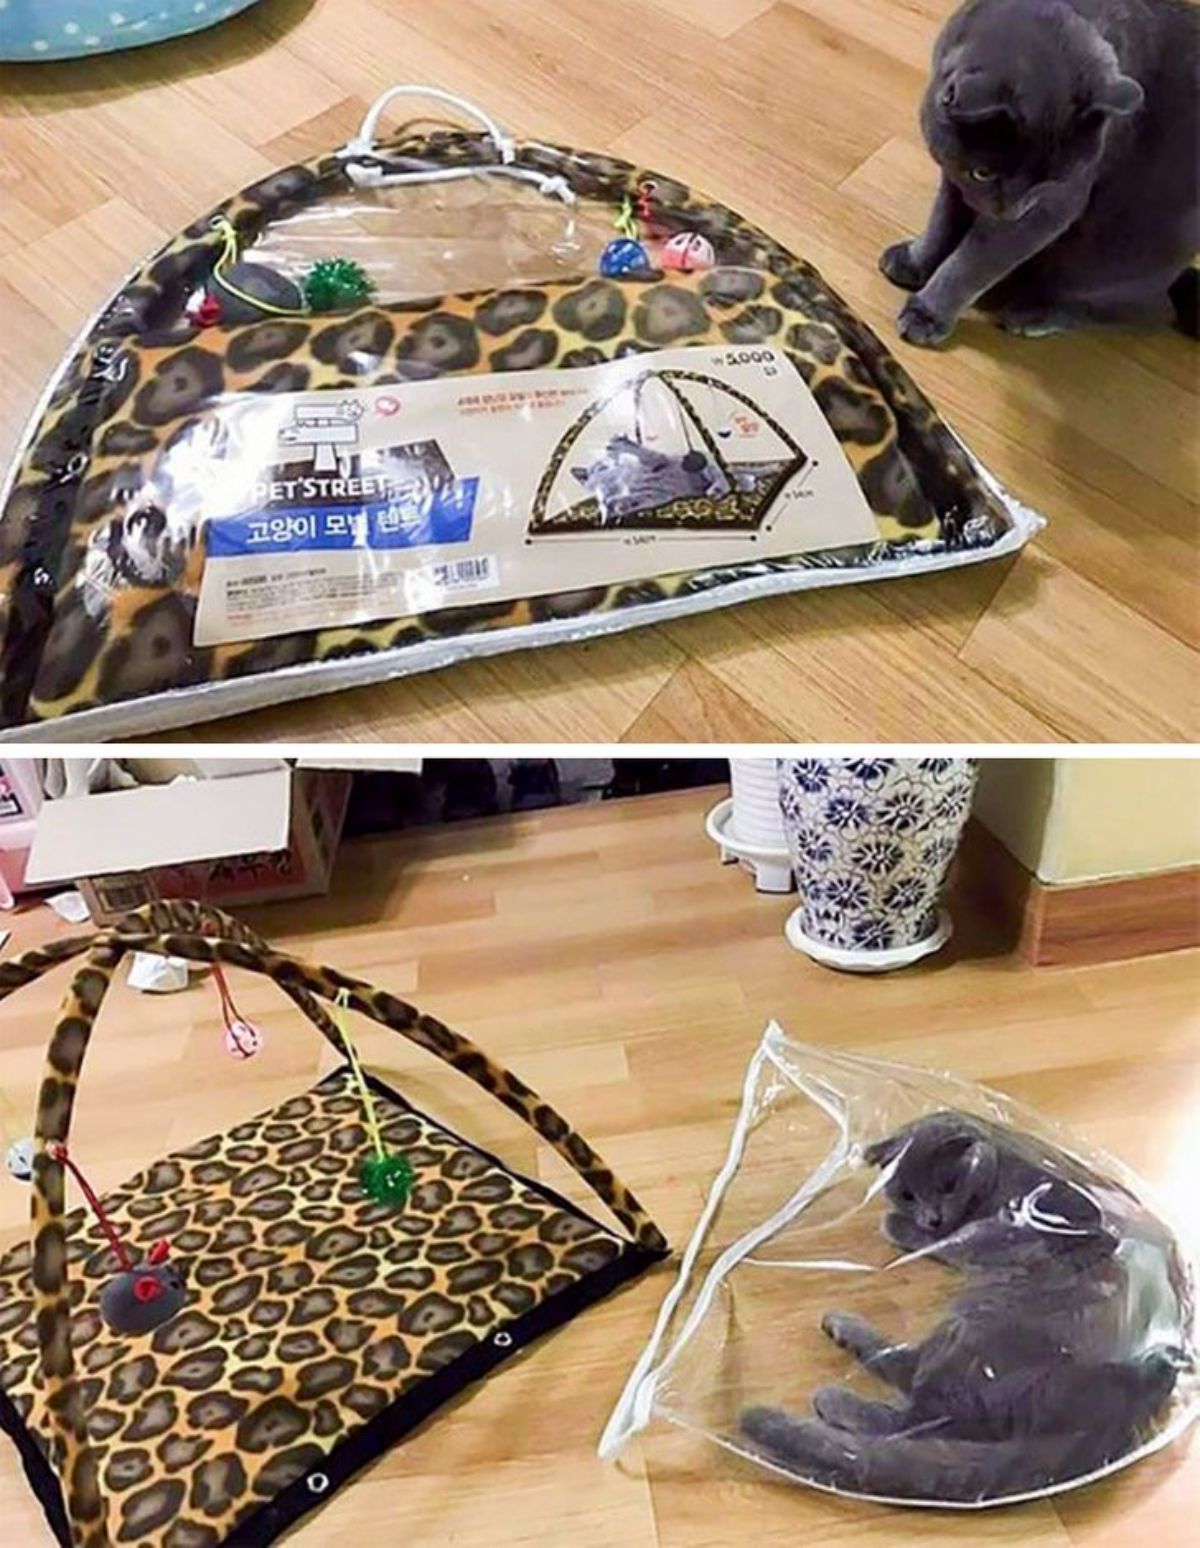 2 photos of a grey cat with a cat tent toy and in the second the cat is laying inside the plastic packaging of the toy